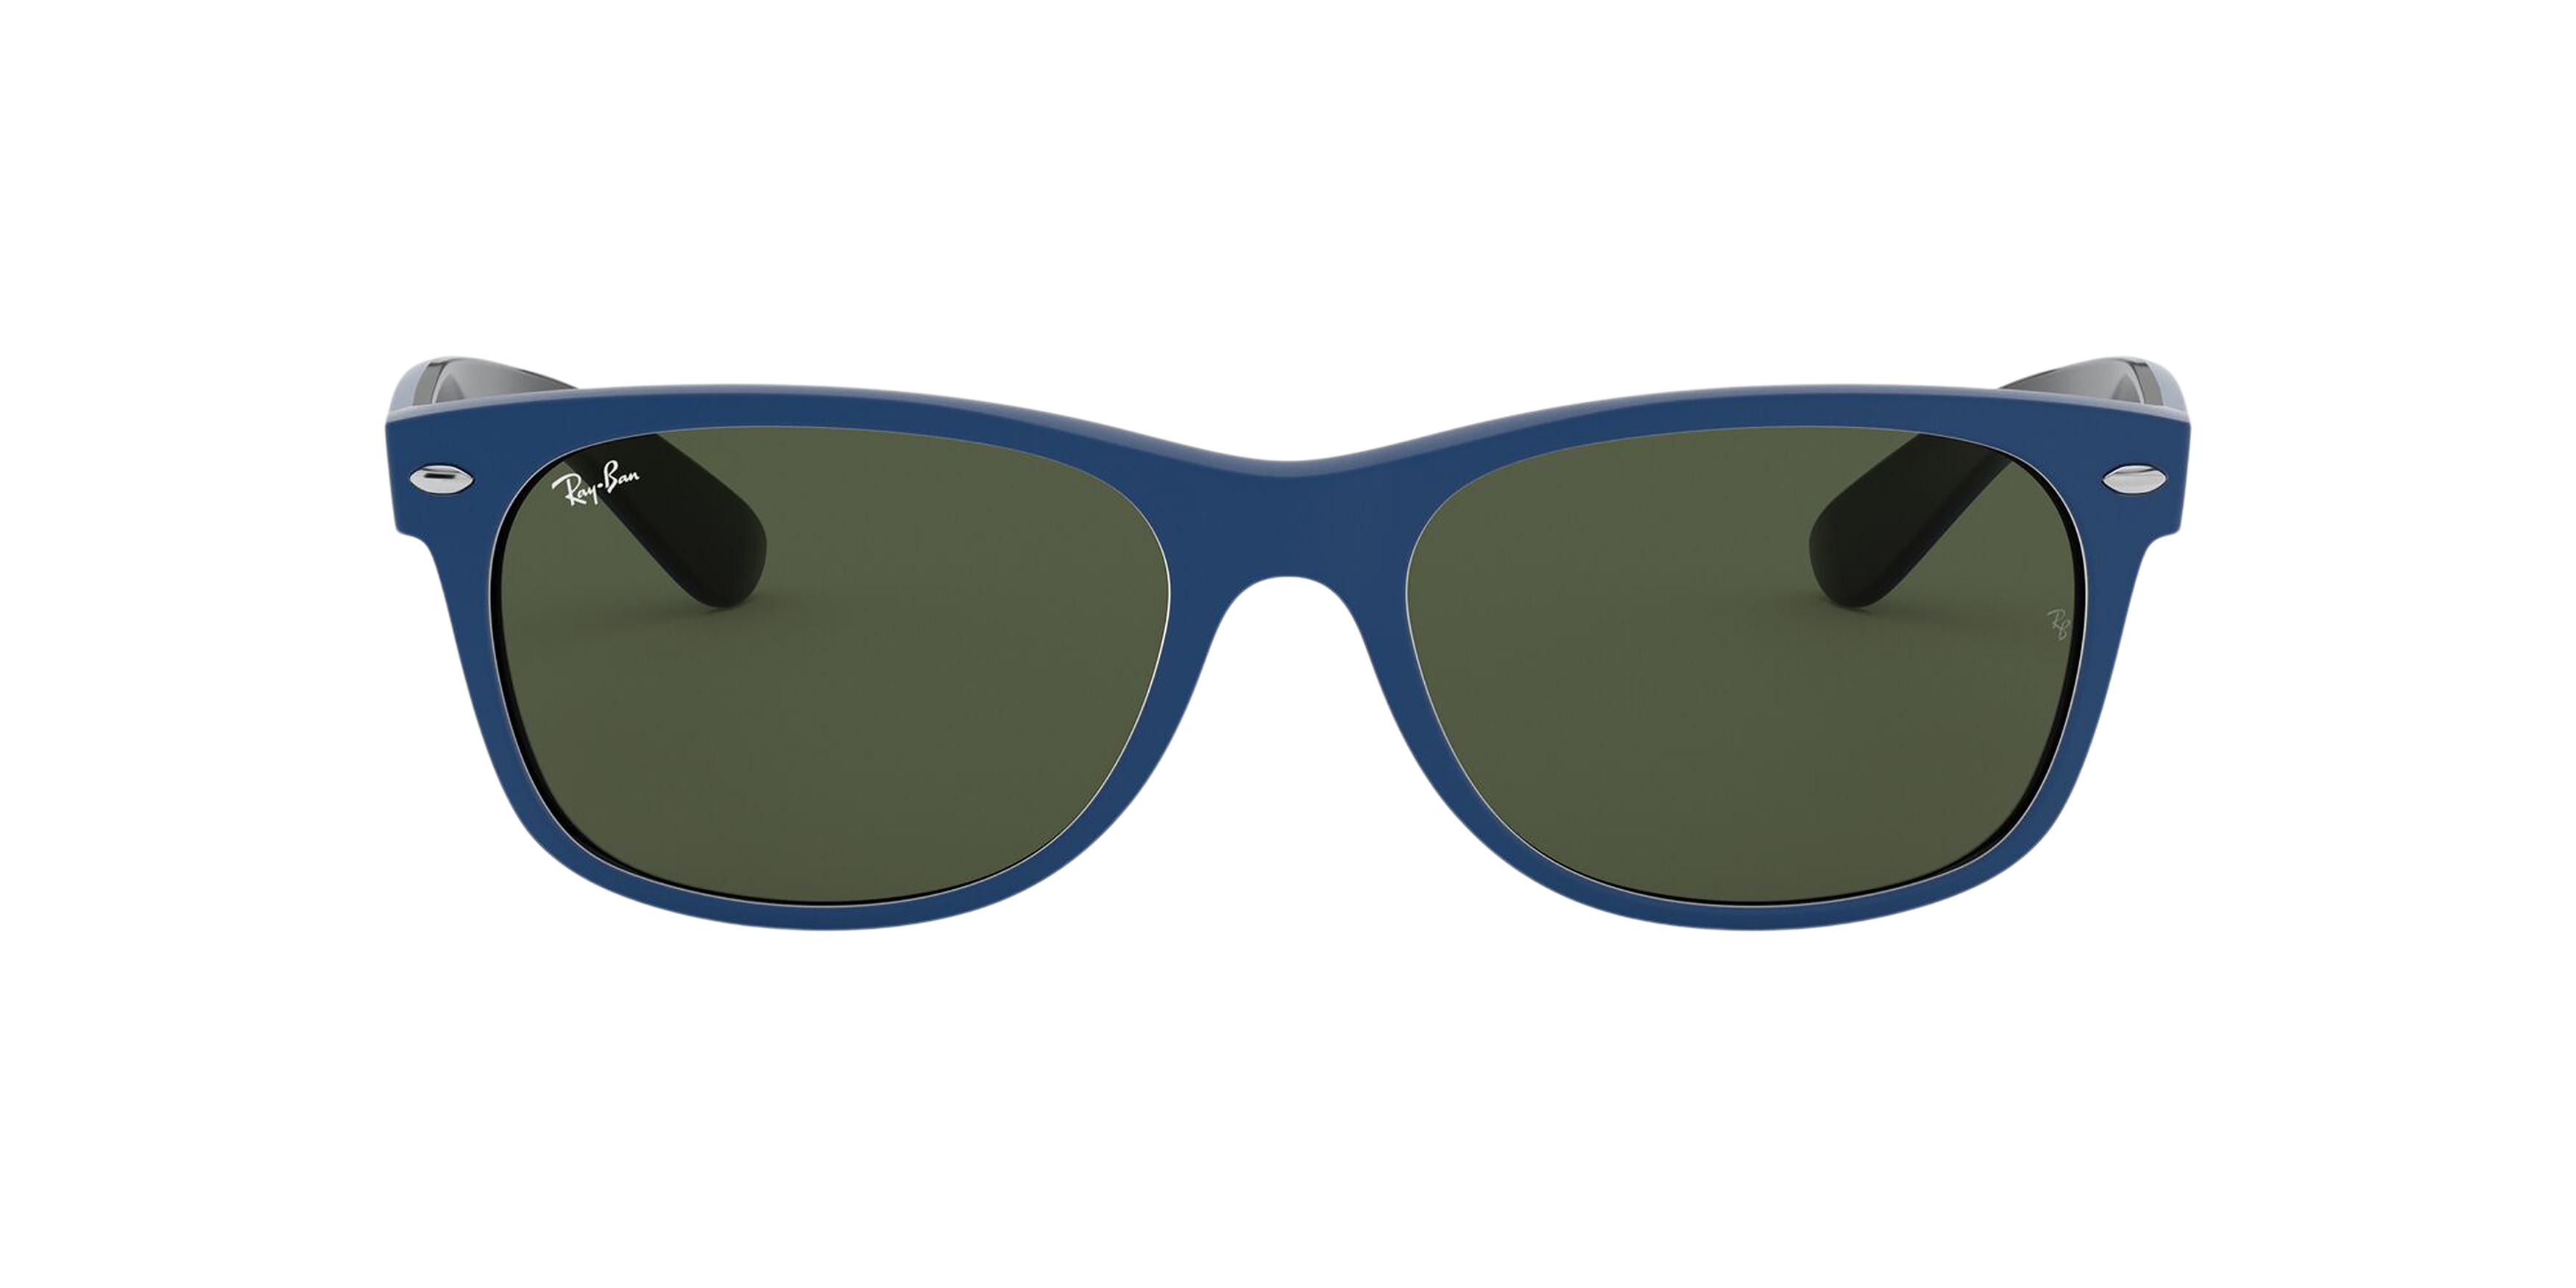 [products.image.front] Ray-Ban New Wayfarer Color Mix RB2132 646331